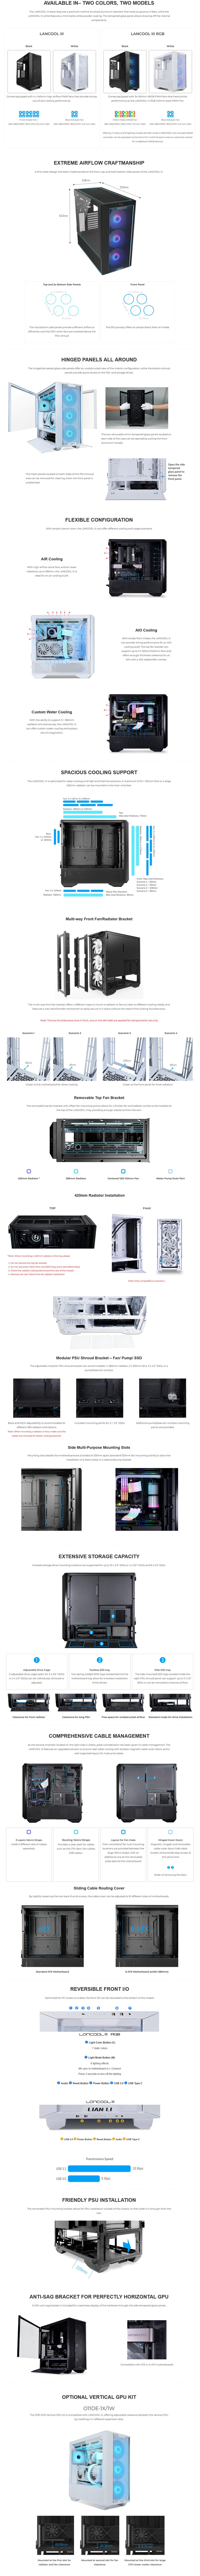 A large marketing image providing additional information about the product Lian Li Lancool III Mid Tower Case - White - Additional alt info not provided